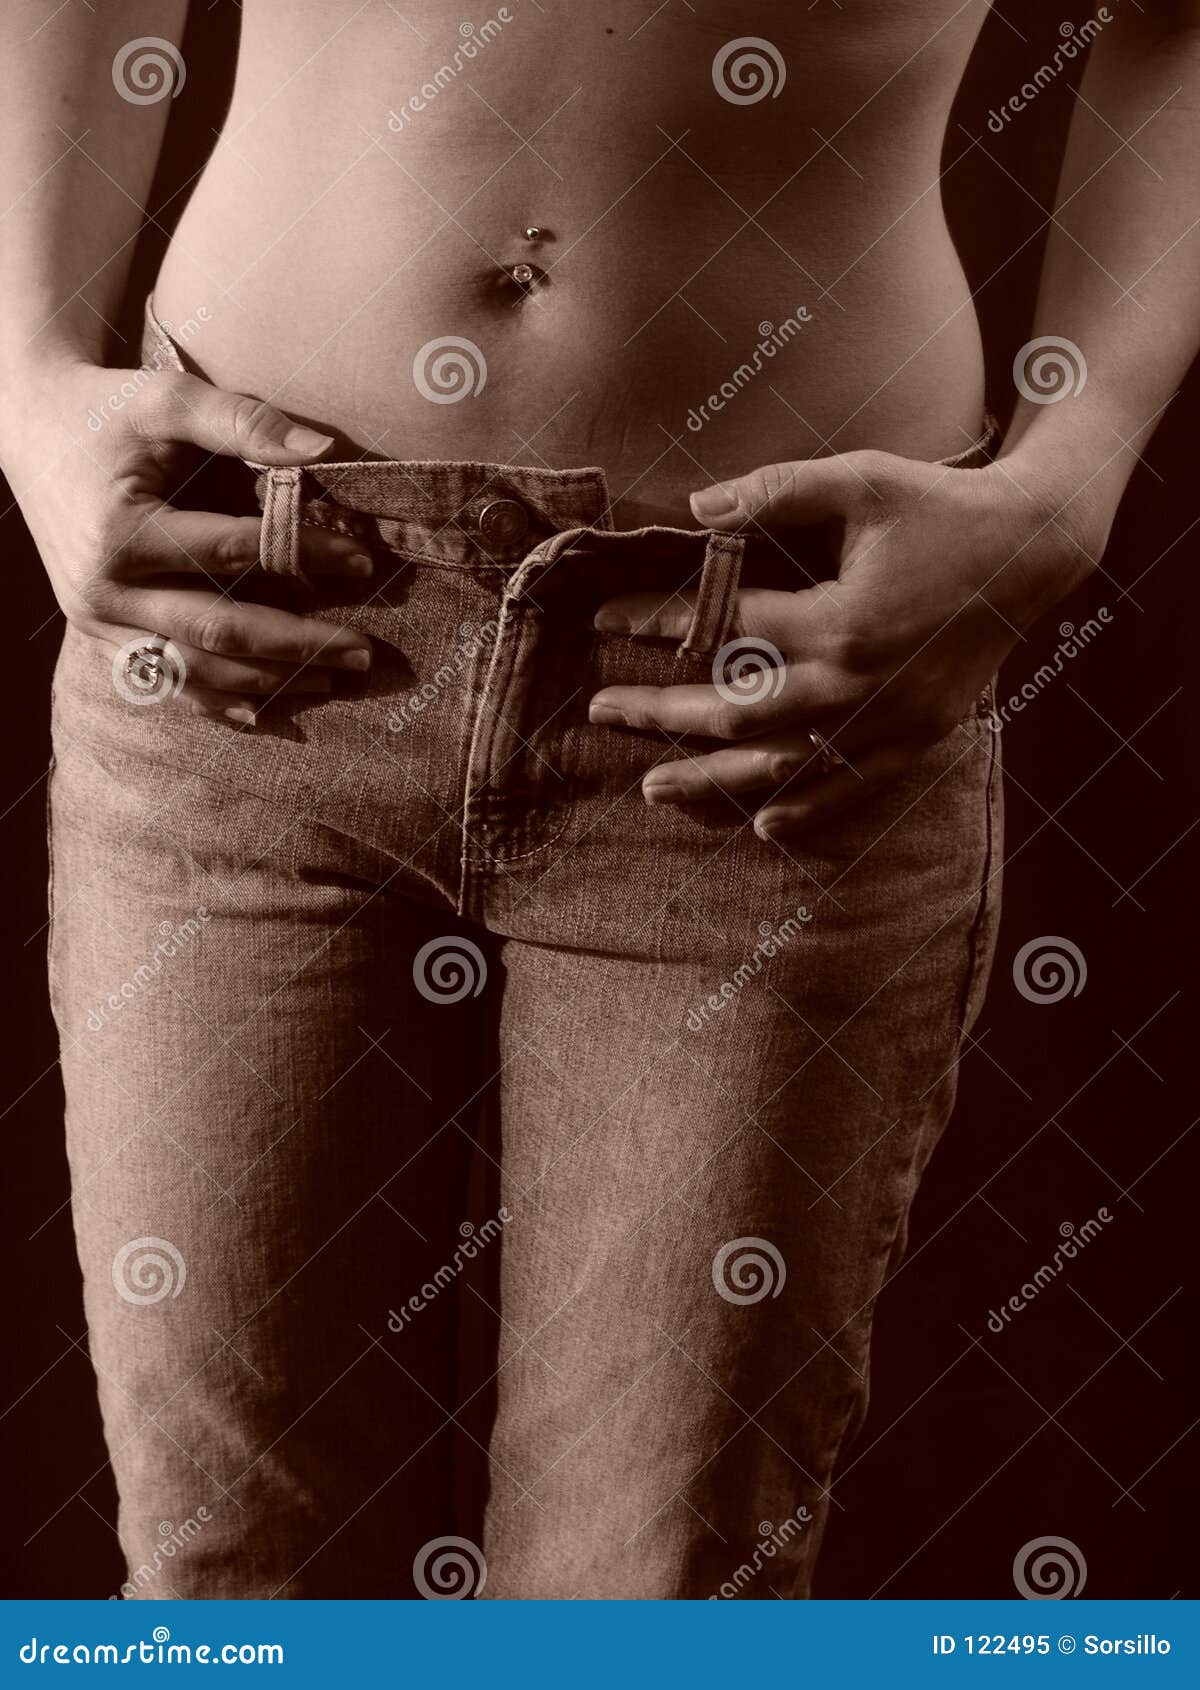 ly naked waist and abs of woman in jeans